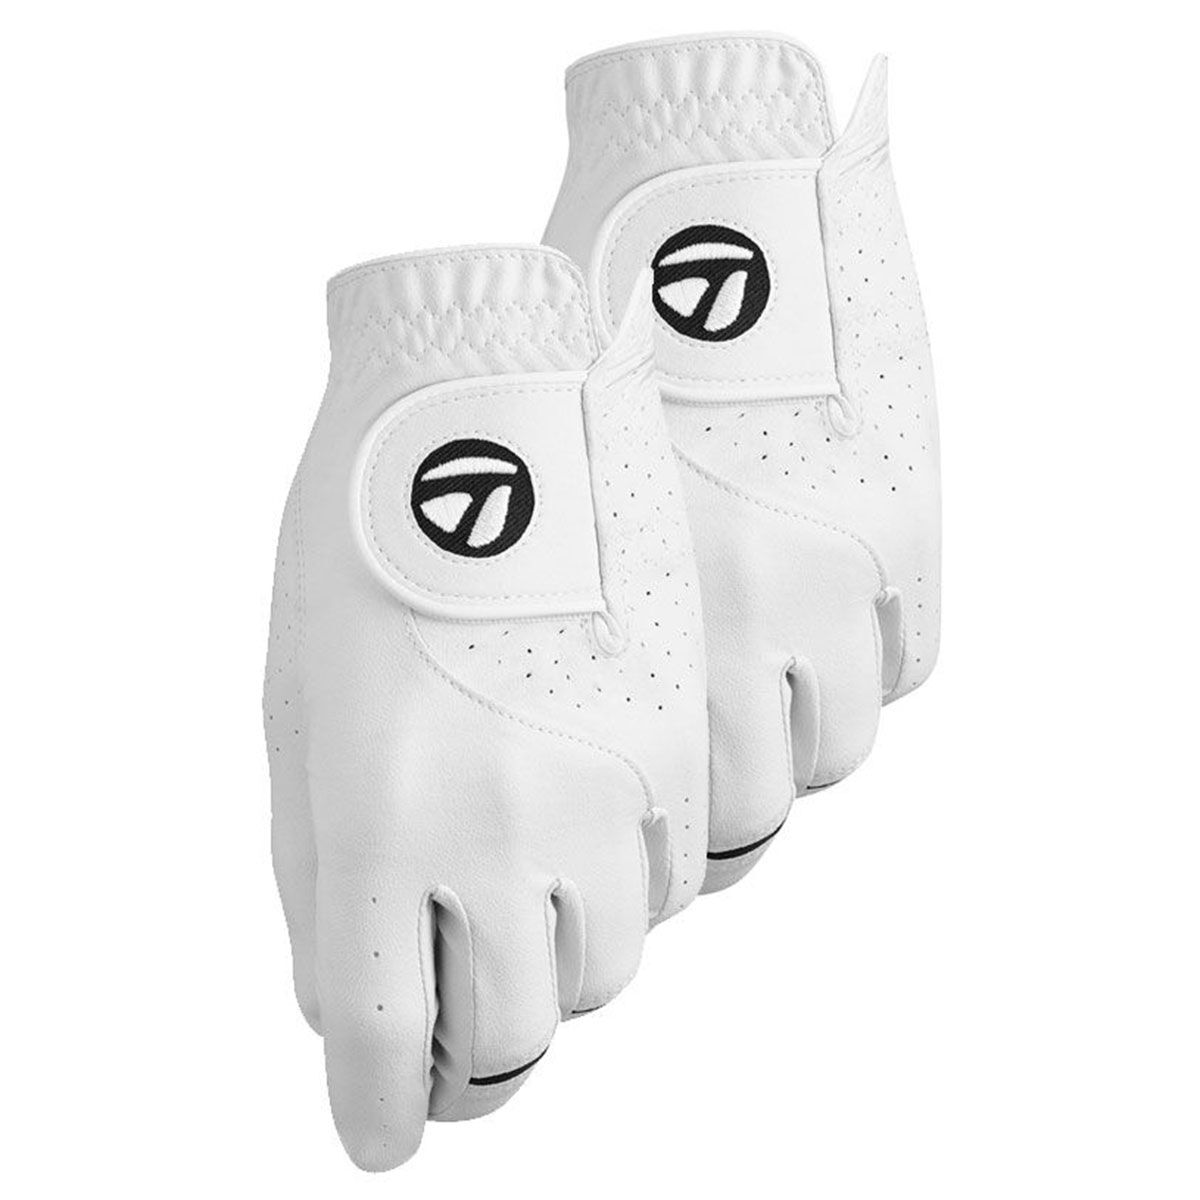 TaylorMade Men's Stratus Tech Golf Glove - 2 Pack, Mens, Left hand, Large, White | American Golf von TaylorMade